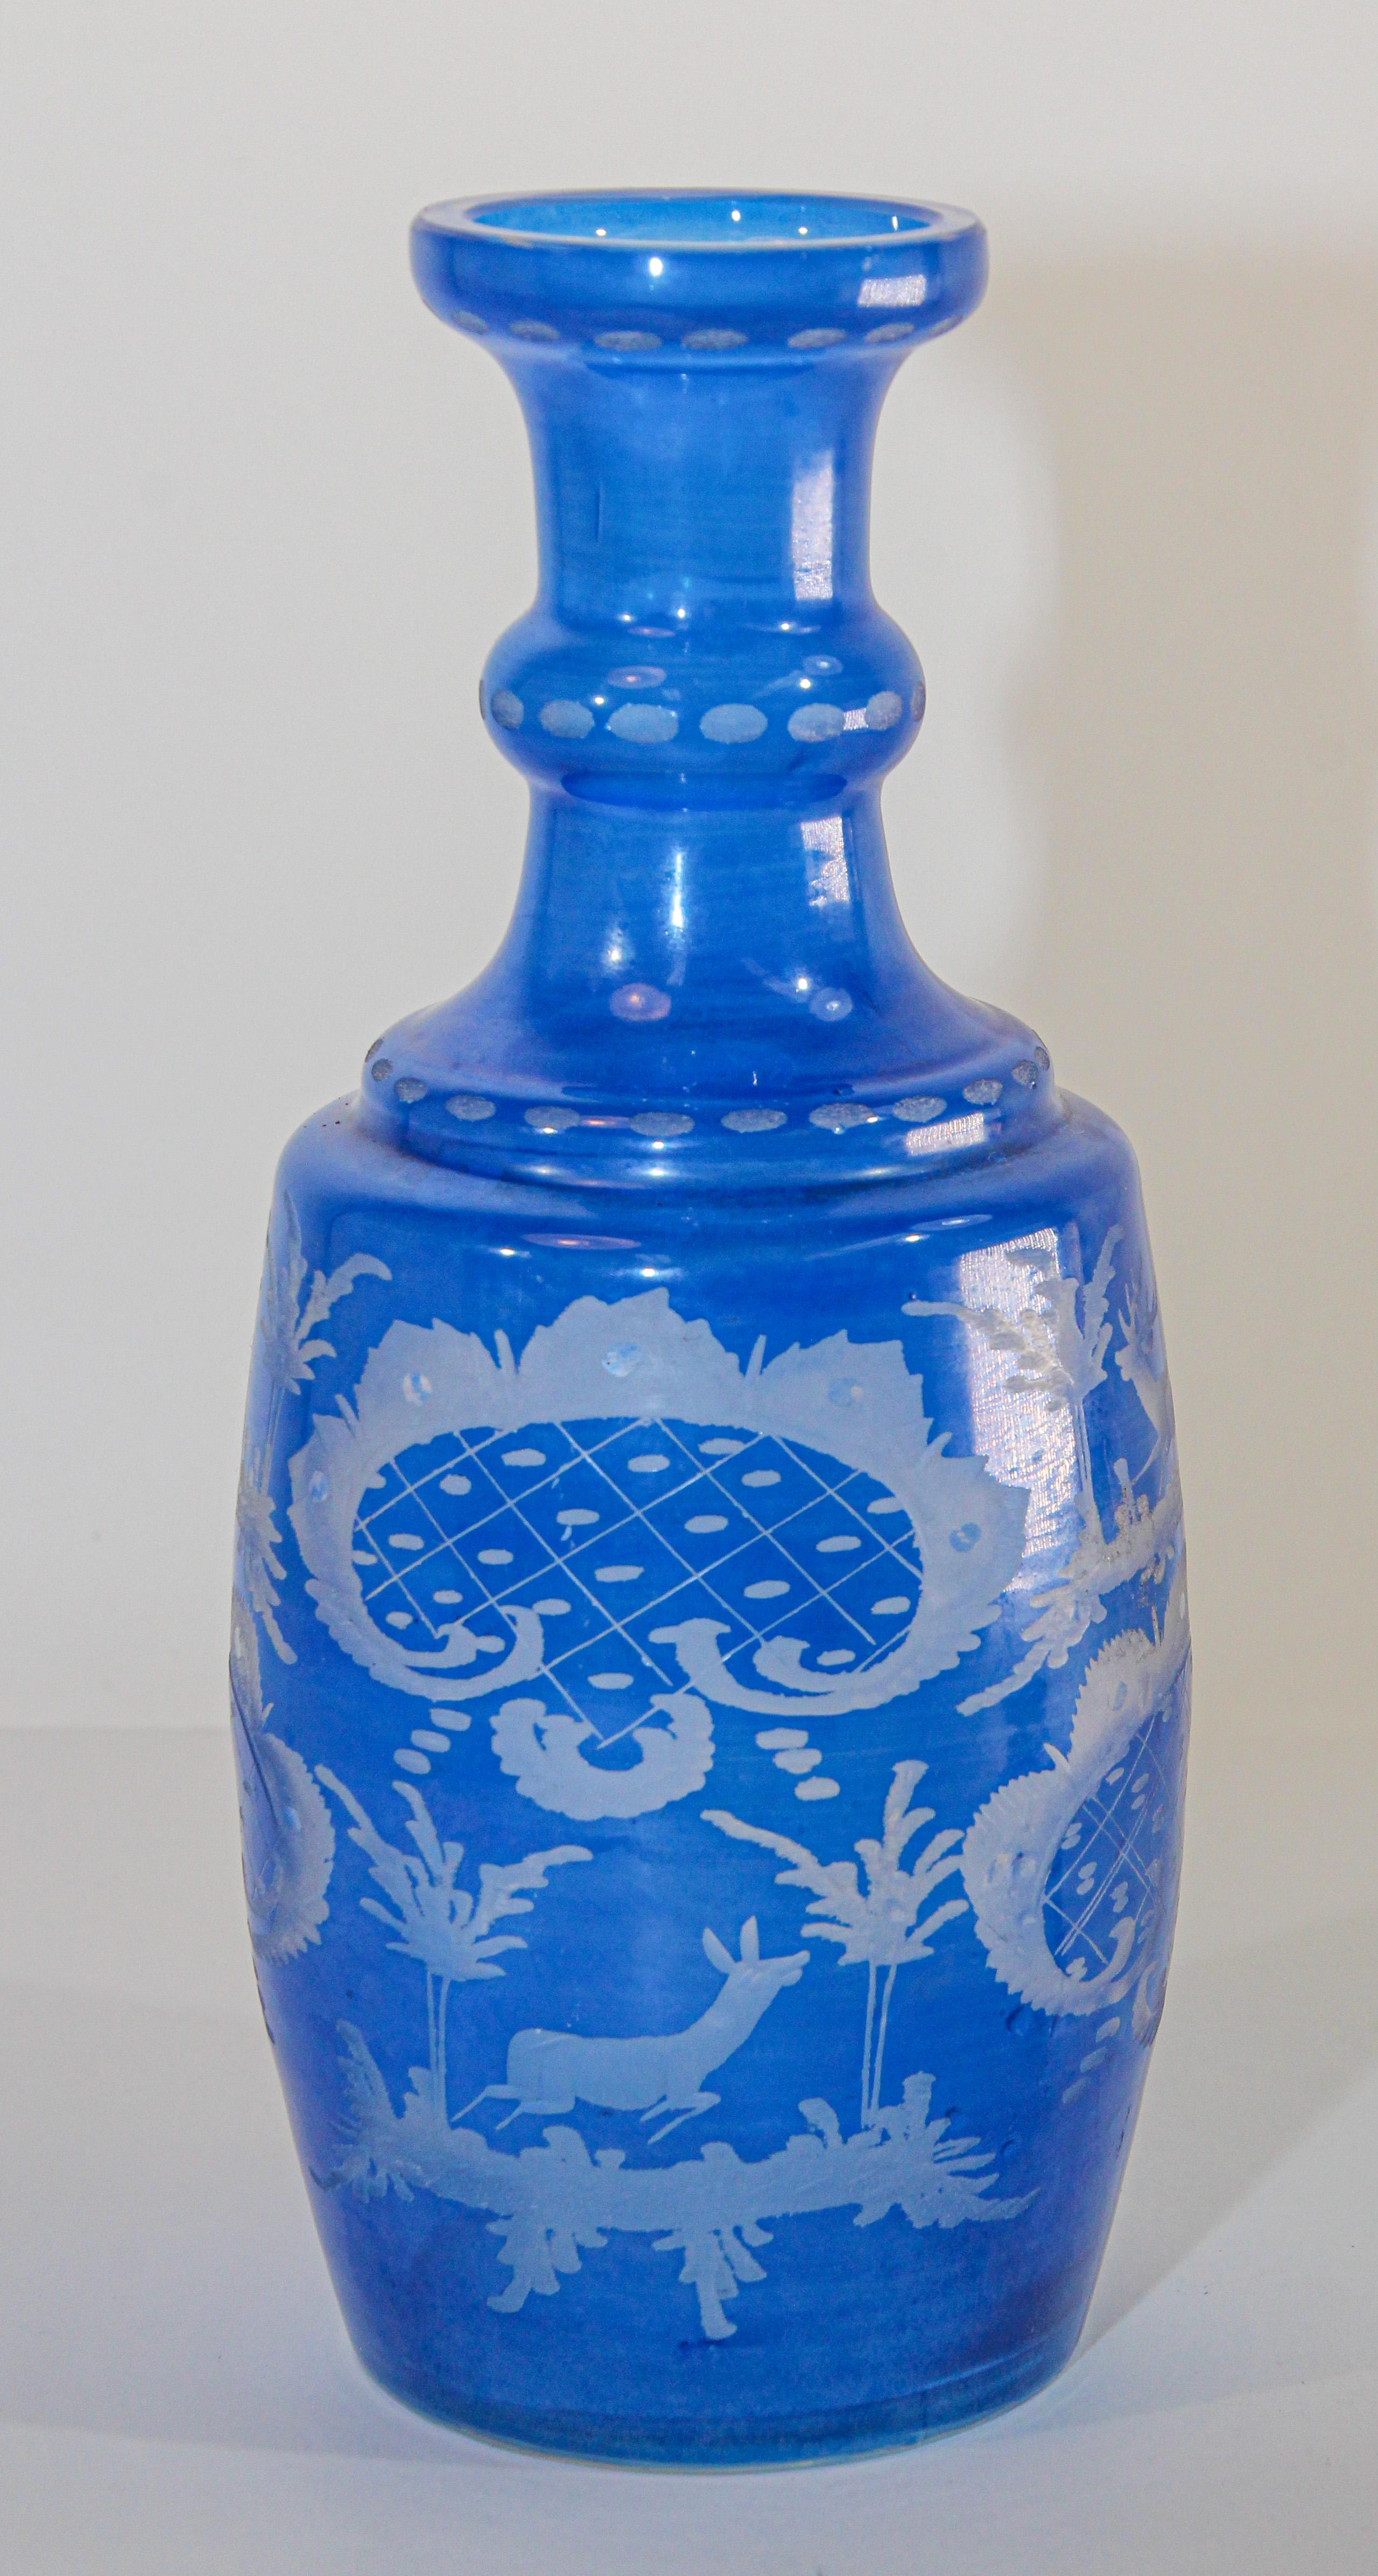 Bohemian Blue Antique Engraved Glass Bottle Covered Decanter For Sale 3